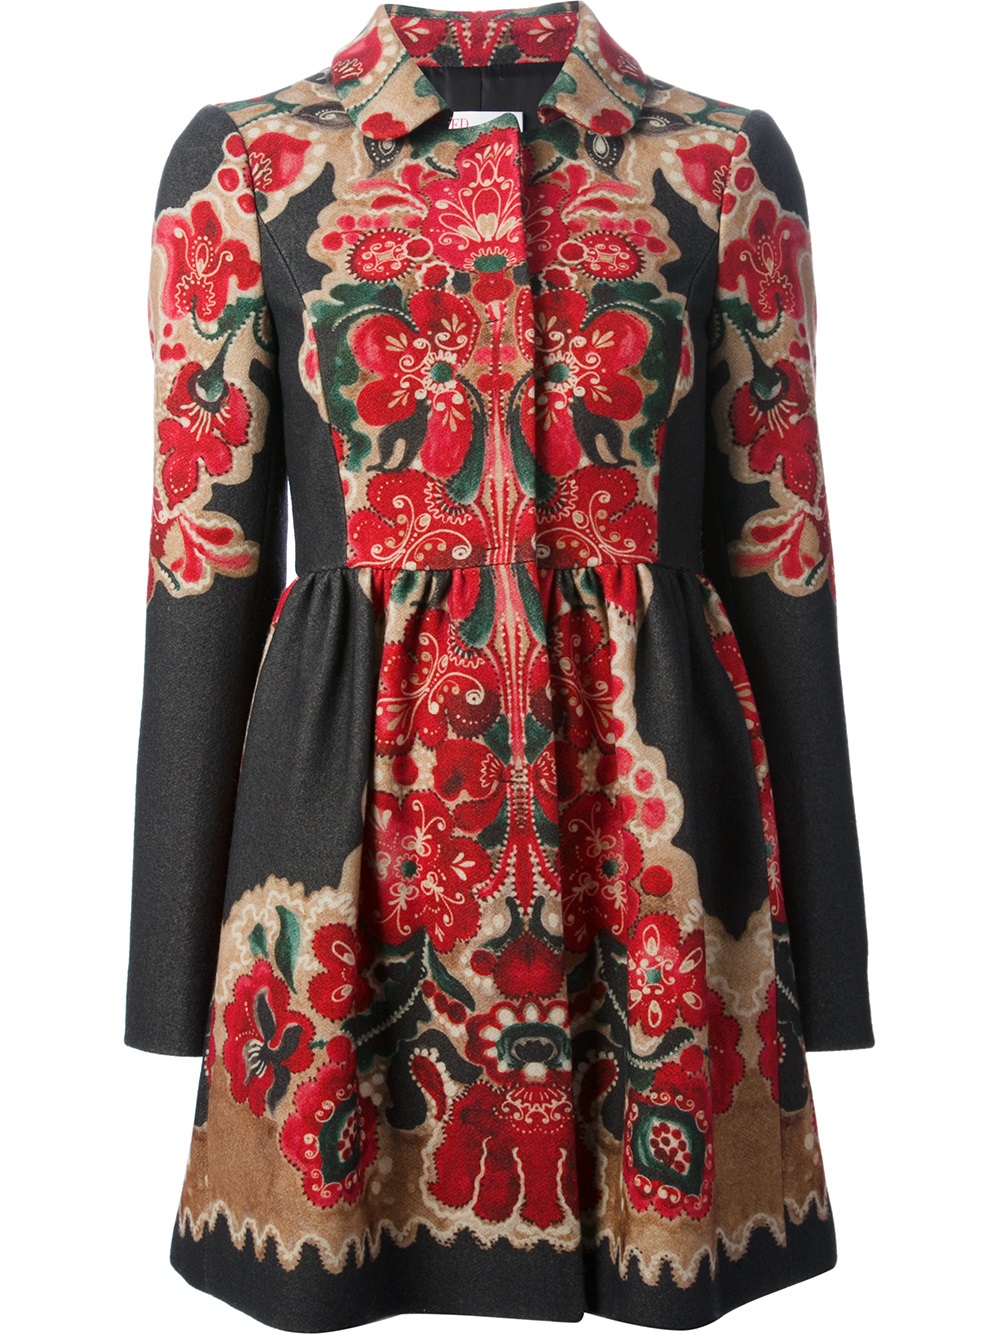 Lyst - Red Valentino Floral Print Coat